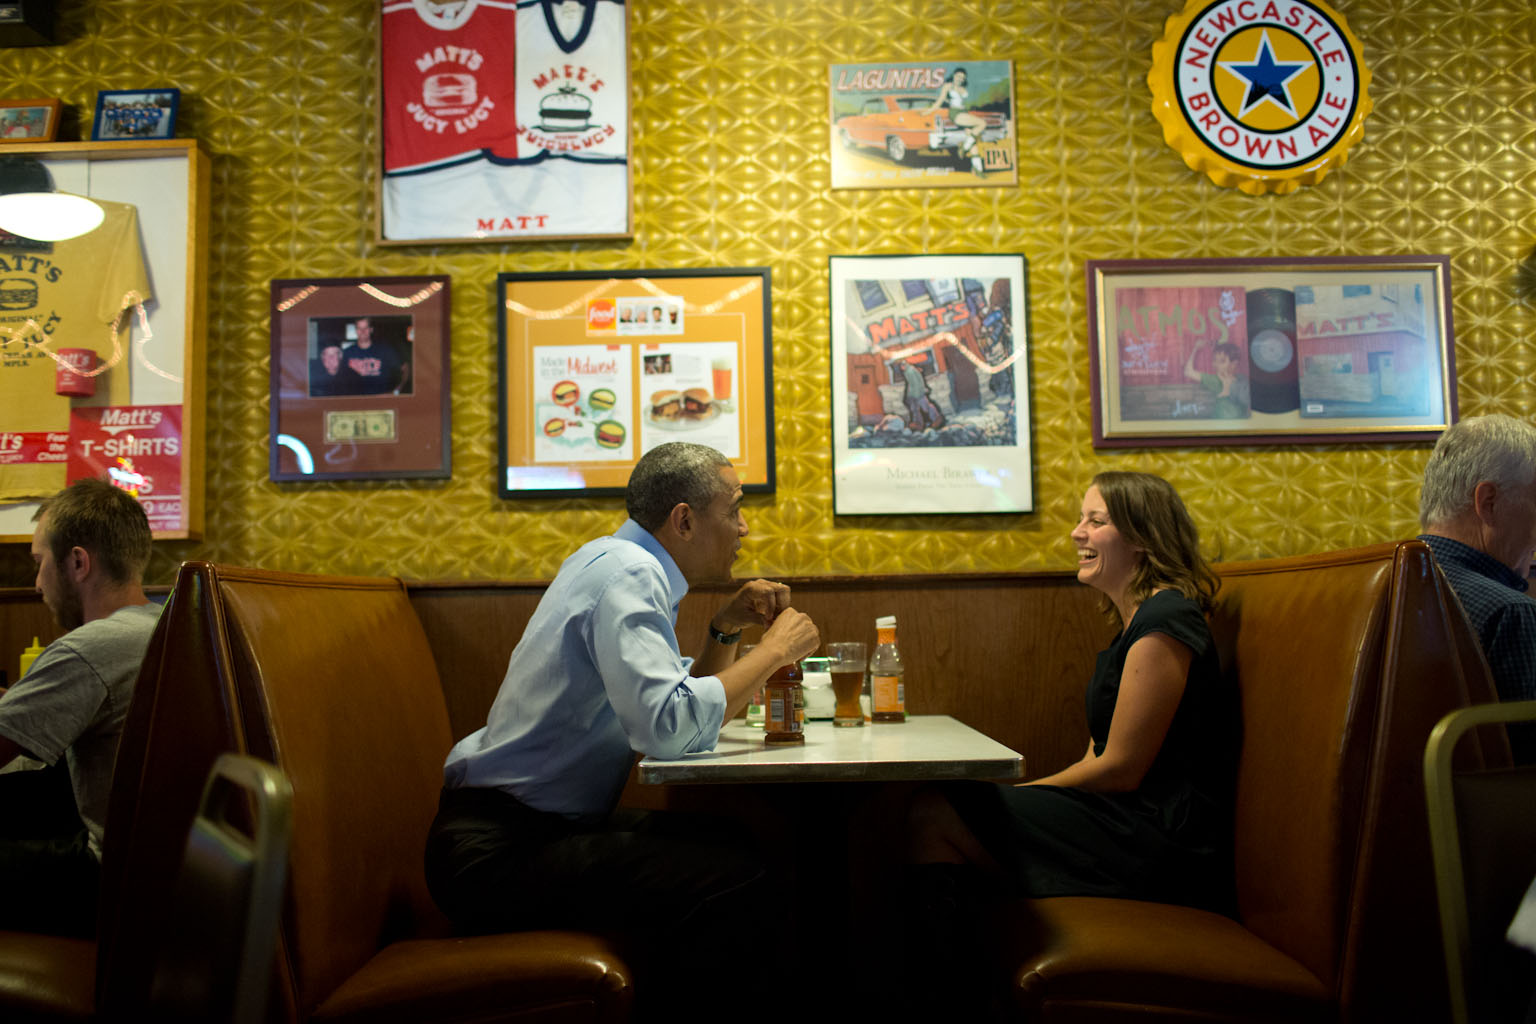 President Barack Obama has lunch with Rebekah Erler at Matt's Bar in Minneapolis, Minn., June 26, 2014. Erler is a 36-year-old working wife and mother of two pre-school aged boys who had written the President a letter about economic difficulties. 